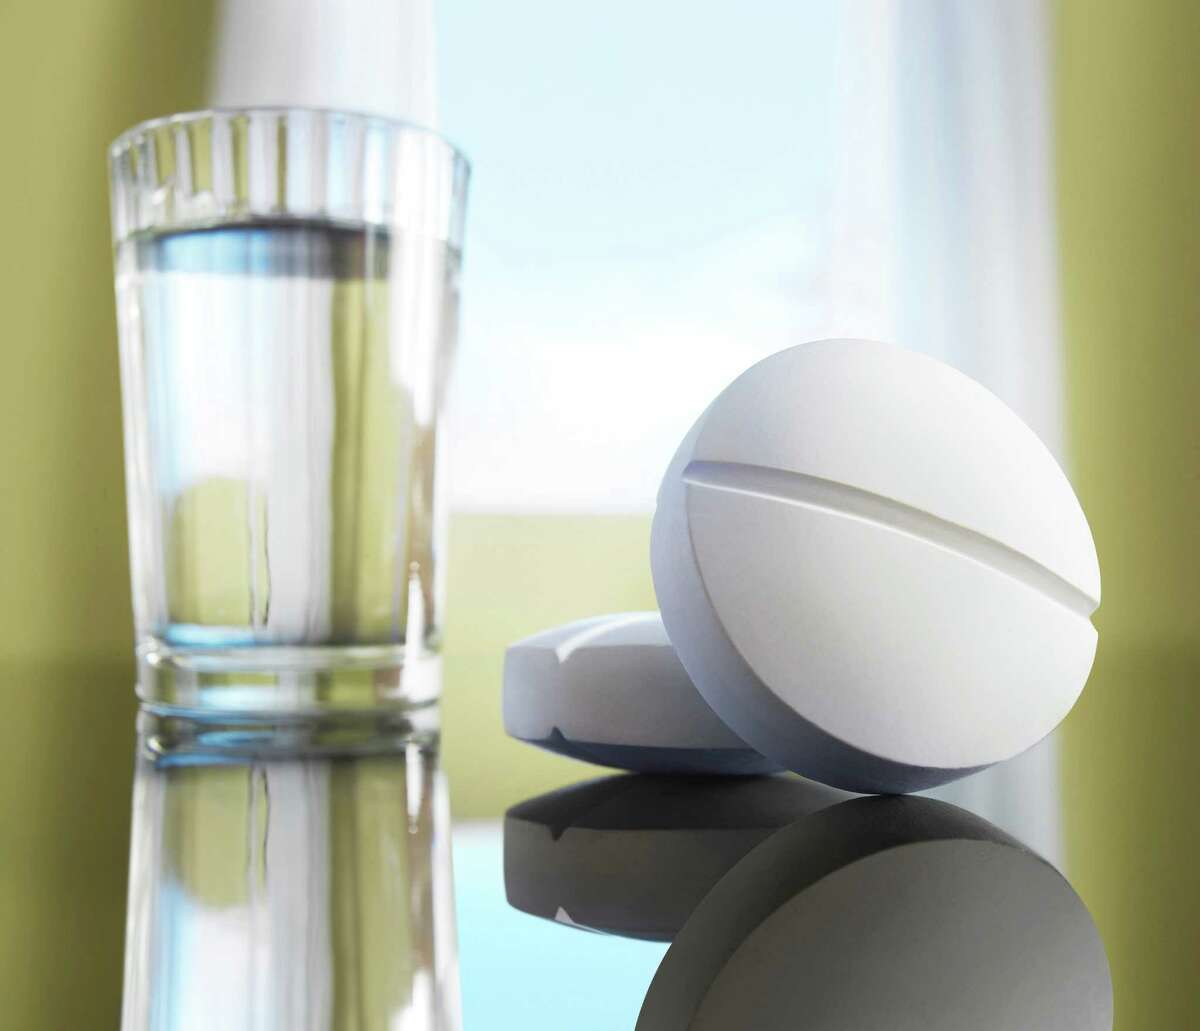 Two aspirins with a glass of water are said to help hangovers.